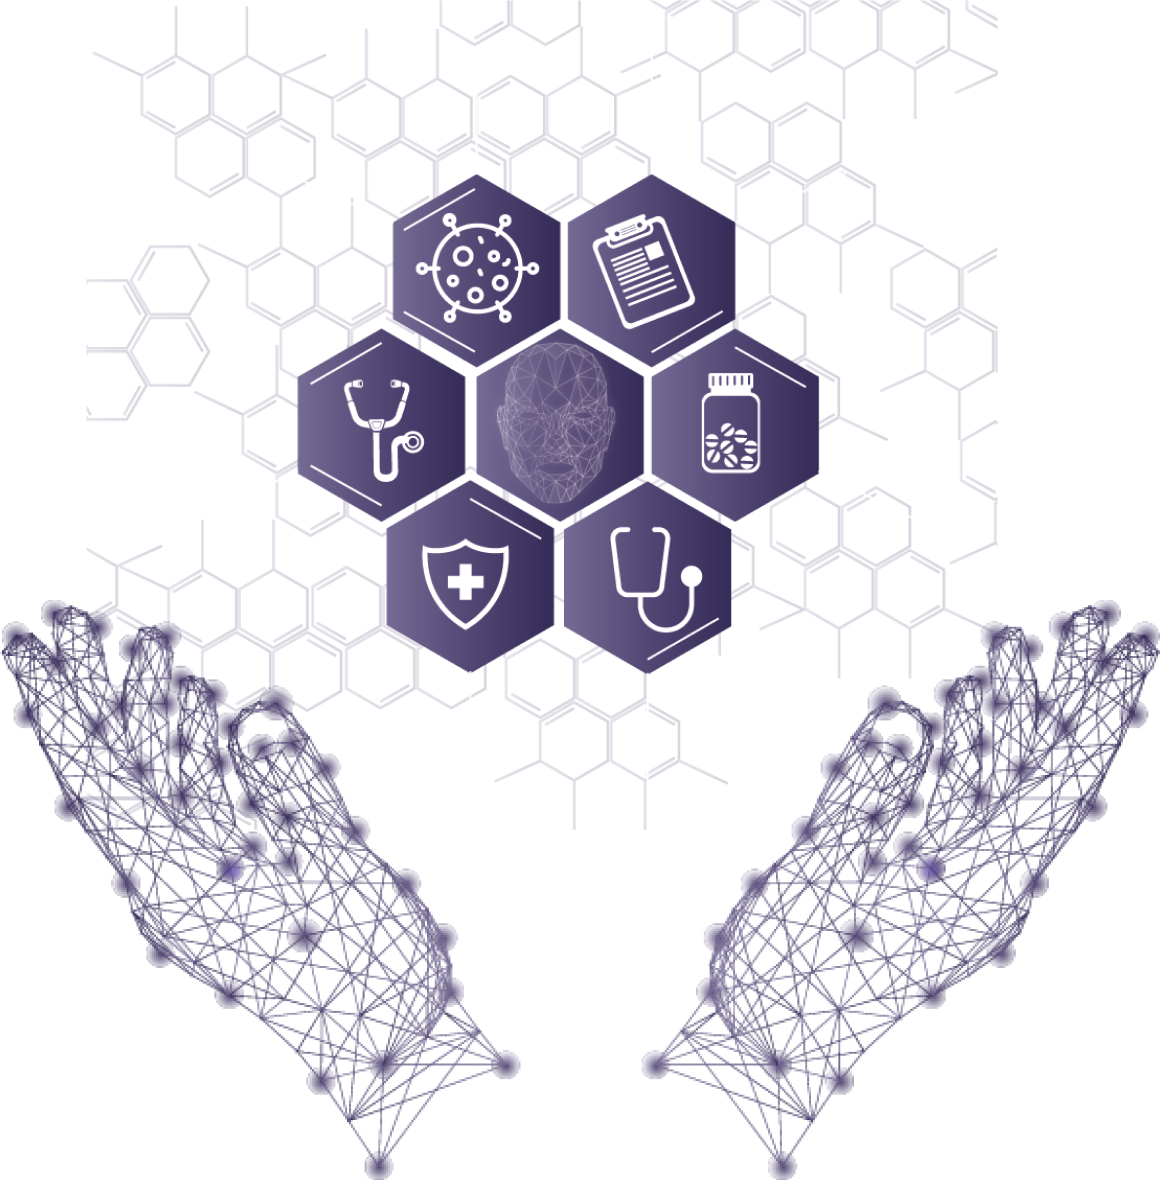 Hexagonal graphic elements representing healthcare technology with icons for virus, prescription, brain, pill bottle, shield with a cross, and stethoscope, alongside a wireframe hand graphic.